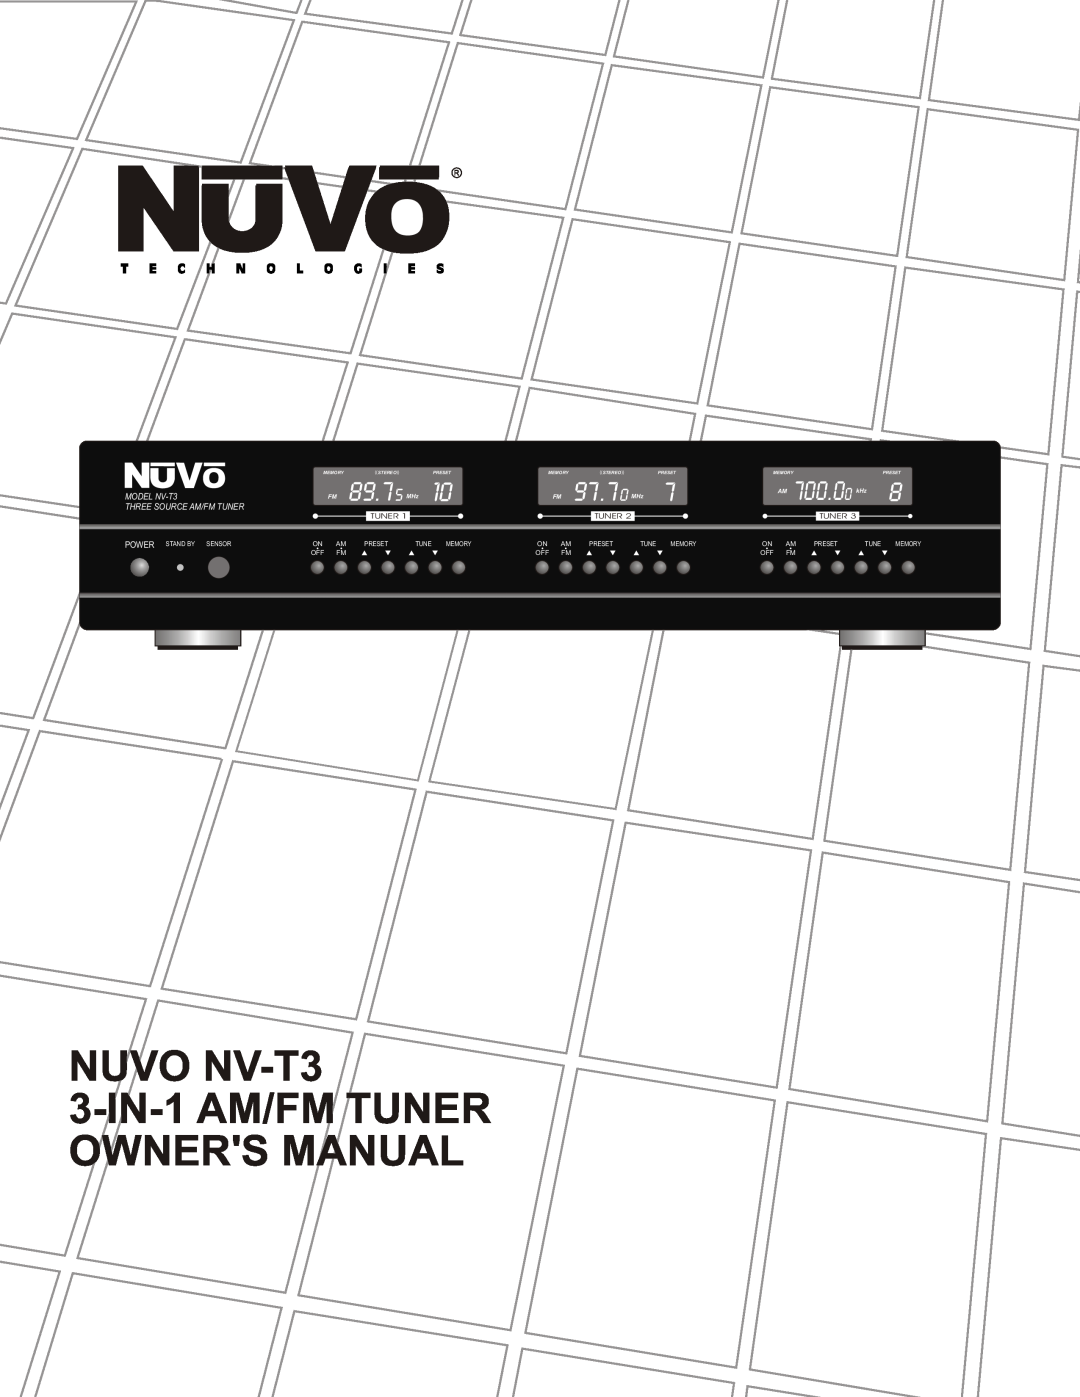 Nuvo owner manual 89.75 MHz, 97.70 MHz, MODEL NV-T3, Three Source Am/Fm Tuner, Power, Stand By Sensor, Preset 